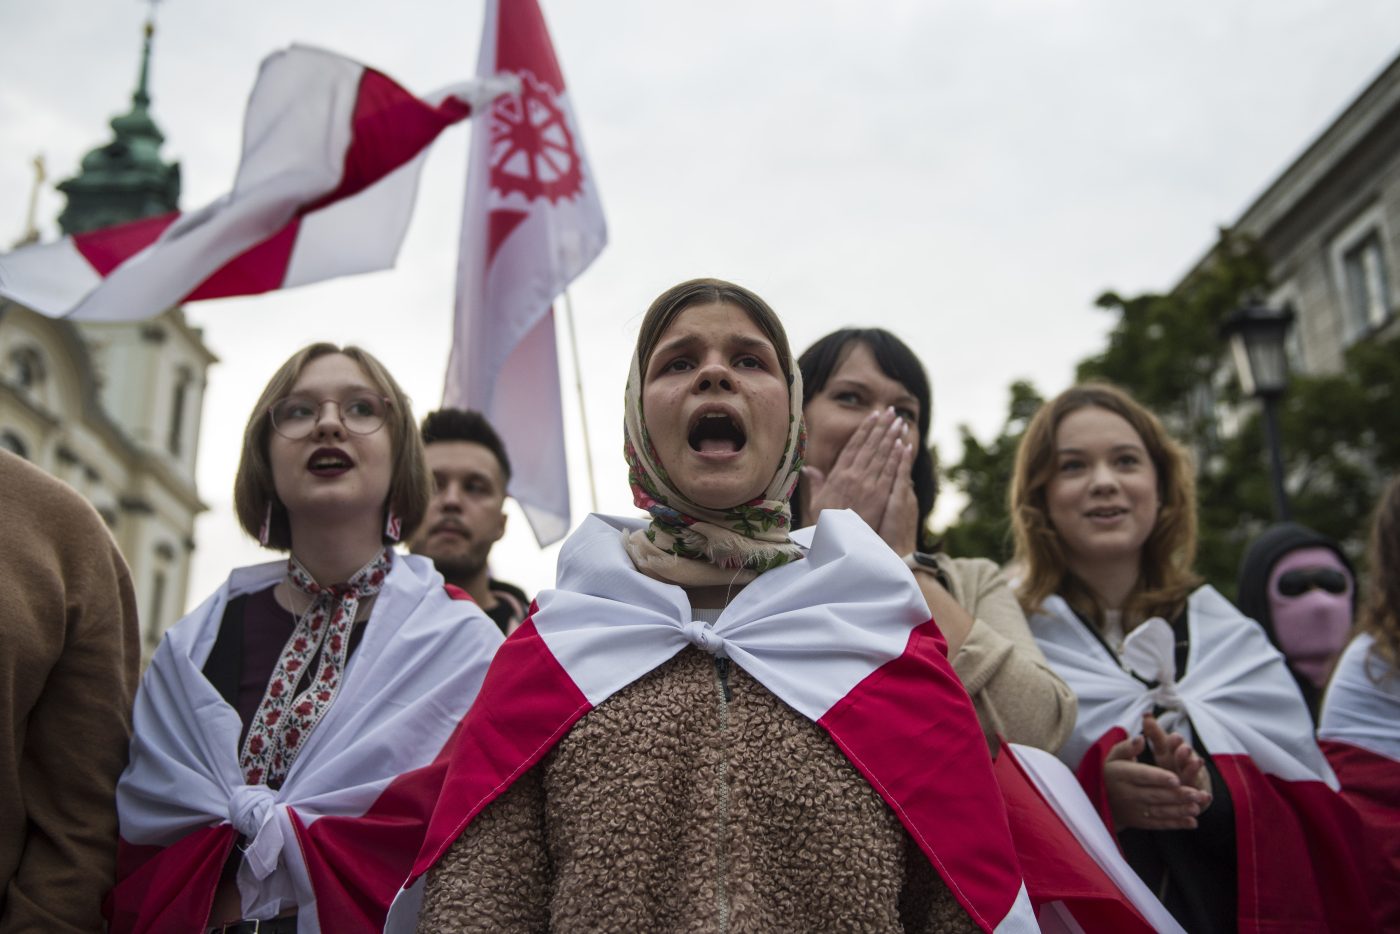 Photo: Belarusian protesters chant slogans and wave white-and-red free Belarusian flags during the march. Hundreds of Belarusians living in exile in Poland, marched in Warsaw to protest political repression in Belarus - a demonstration held on the eve of the 3rd anniversary of the Belarus presidential election that they consider rigged. The protest focused on the Aug. 9, 2020 presidential election in Belarus in which President Alexander Lukashenko was awarded a sixth term in a vote that the opposition and many in the West view as fraudulent. Protesters carried the Belarusian oppositions red-and-white flag, which is banned in Belarus, and chanted Long live Belarus! Credit: Attila Husejnow / SOPA Images/Sipa USA